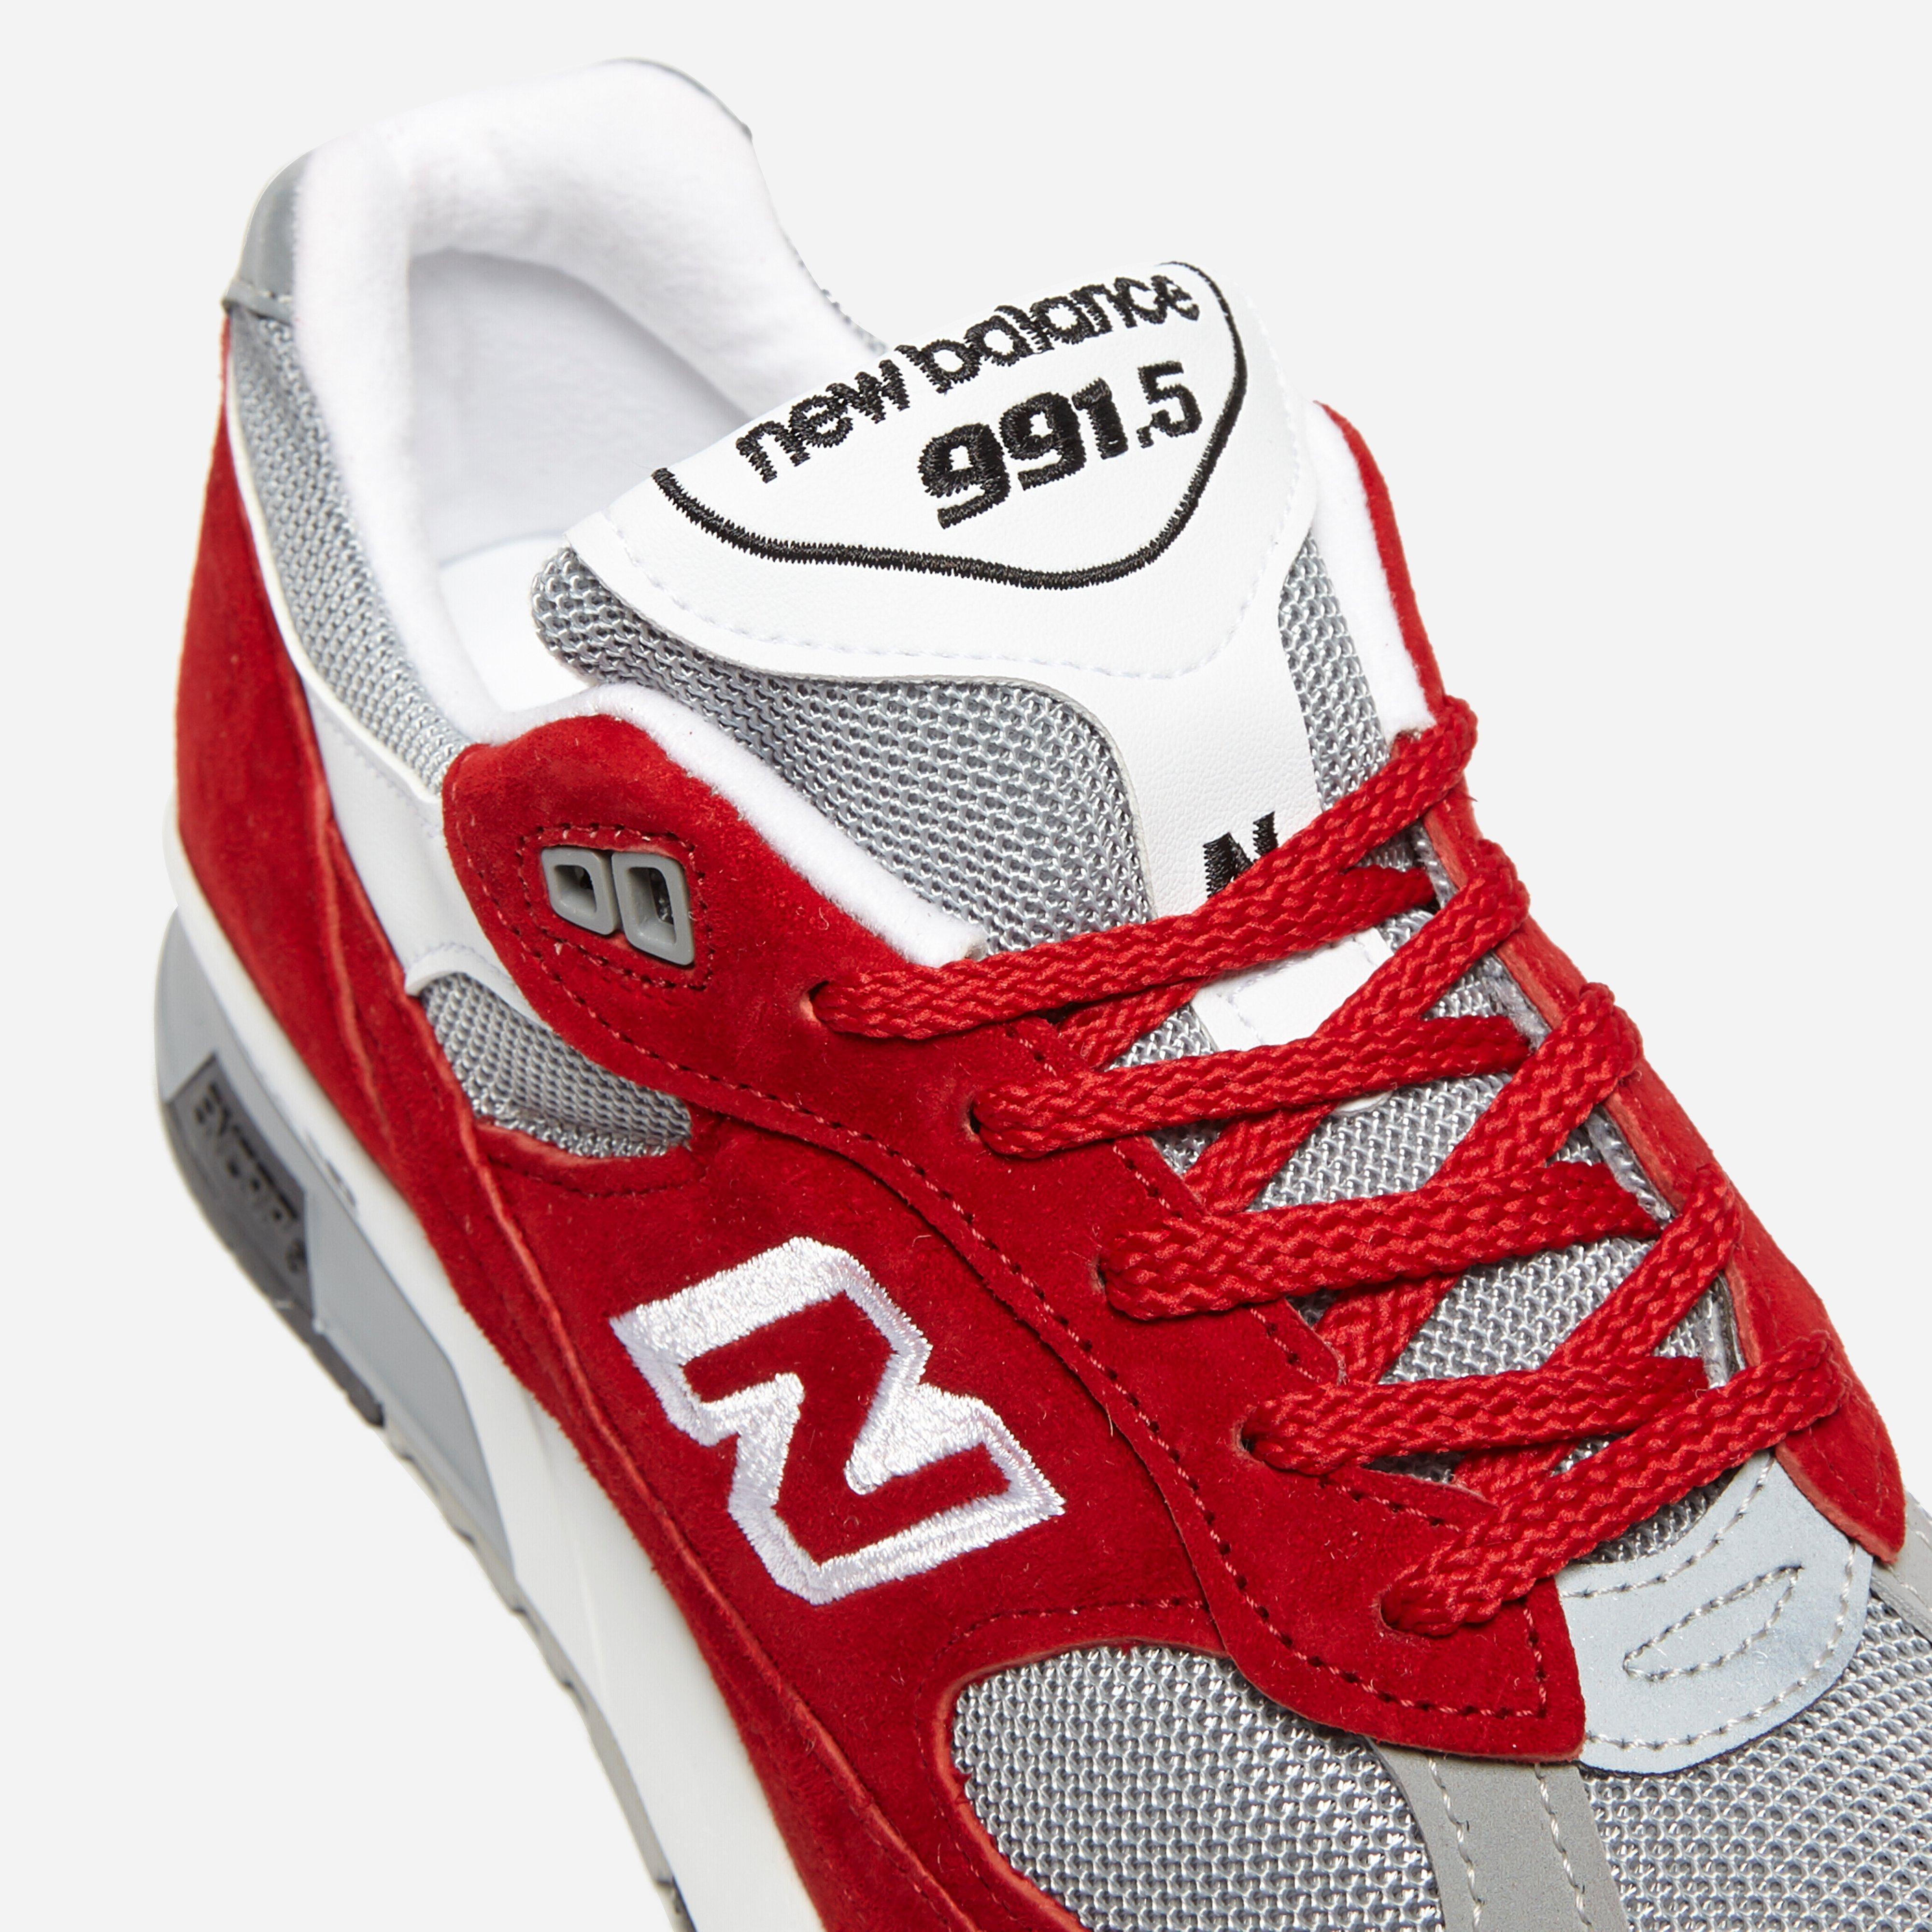 New Balance M 991.5 Aa '991 / 1500' Made In England in Red for Men 